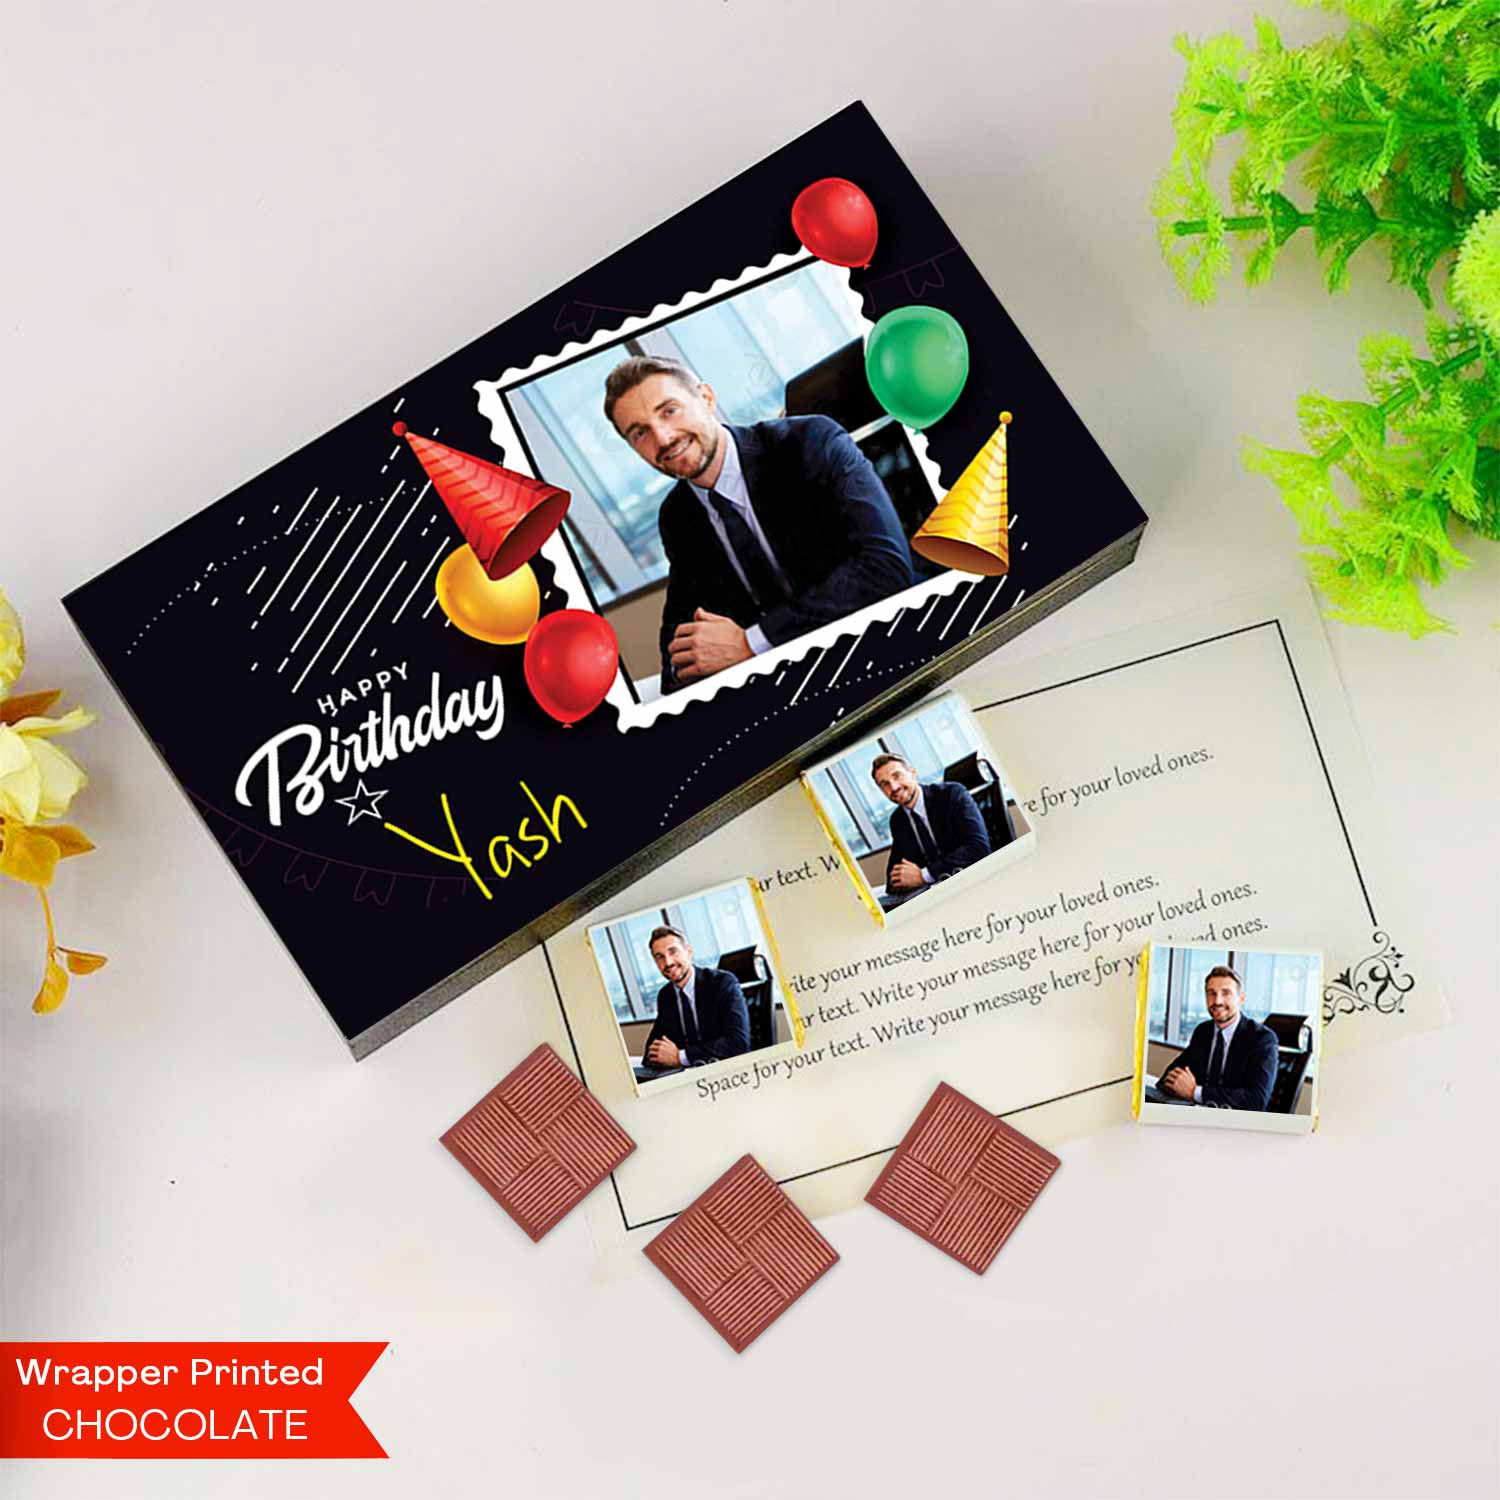  personalised chocolate wrappers near me design your own chocolate bar wrapper online printed chocolate wrappers personalised chocolates with names custom printed chocolate personalised chocolate corporate gifts customized chocolate wrappers bengali customized chocolate wrappers india